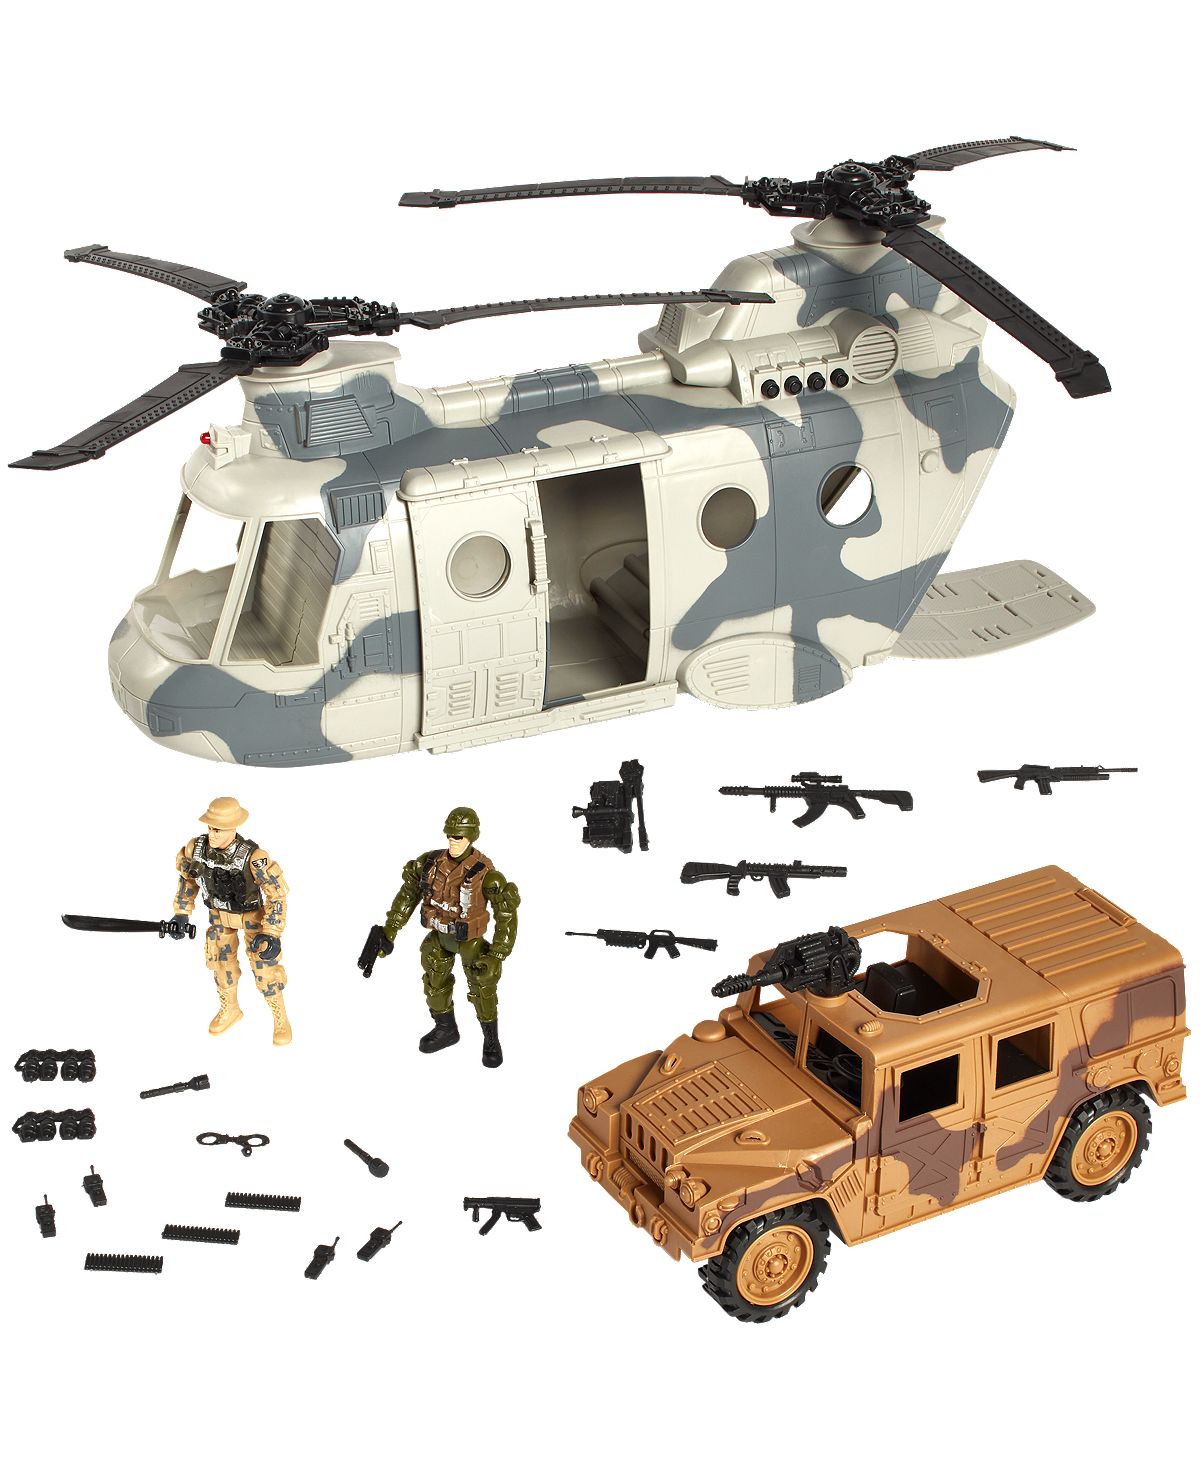 True Heroes Helicopter Transporter Playset with Lights and Sounds - Toys R Us Exclusive